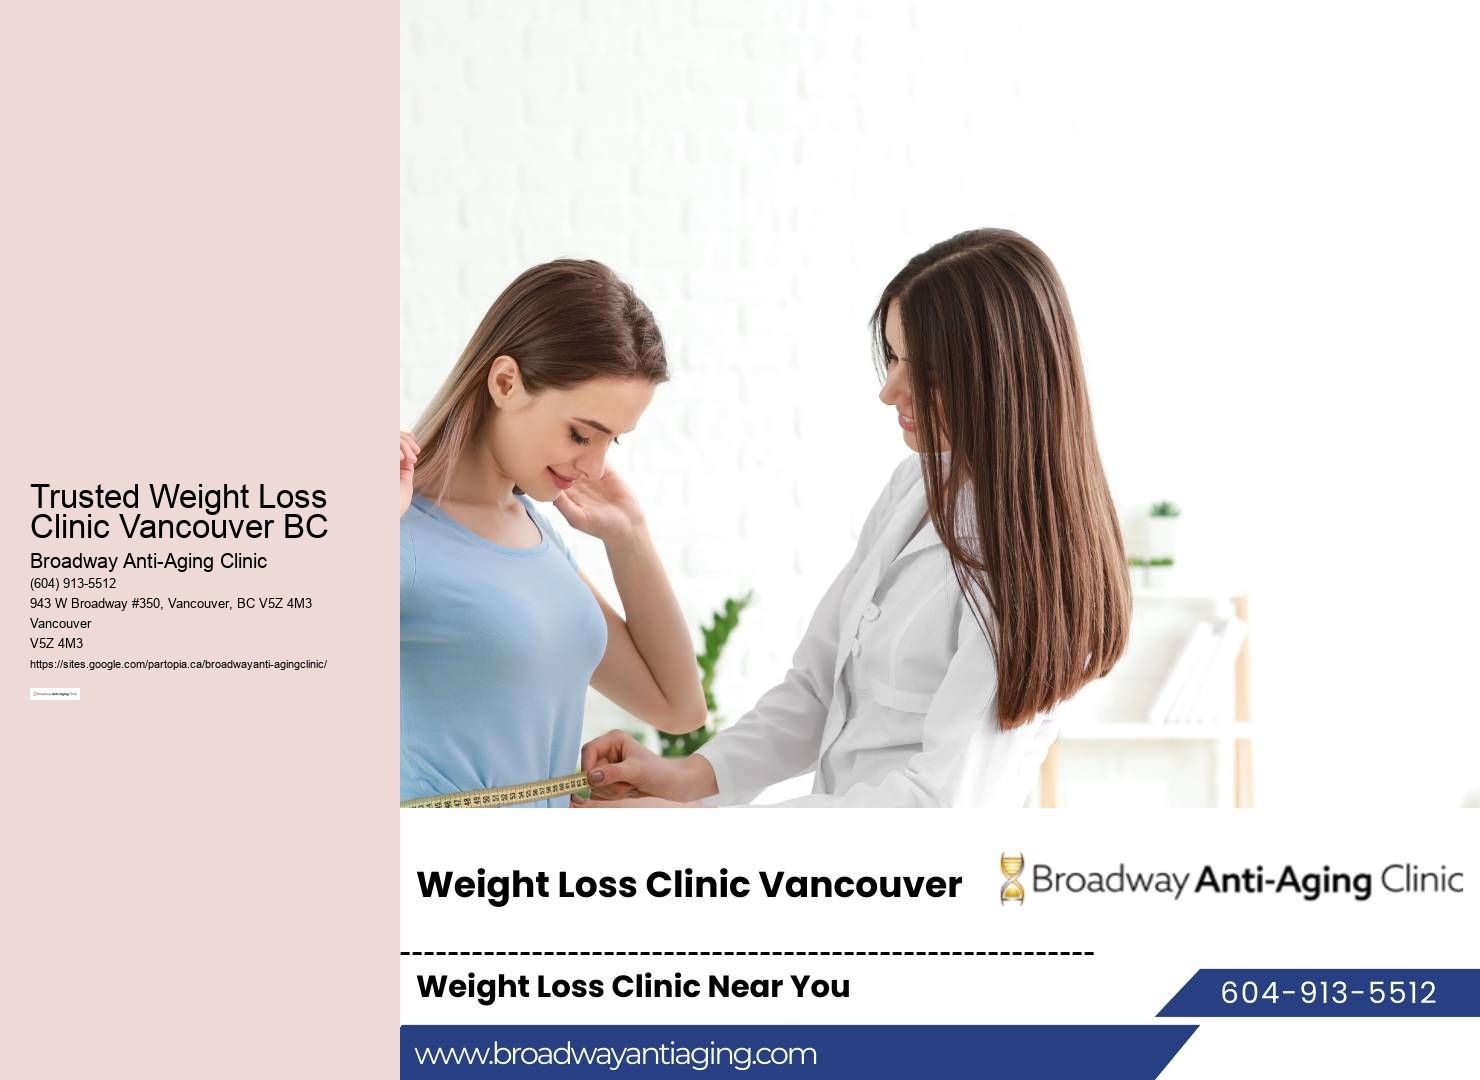 Trusted Weight Loss Clinic Vancouver BC